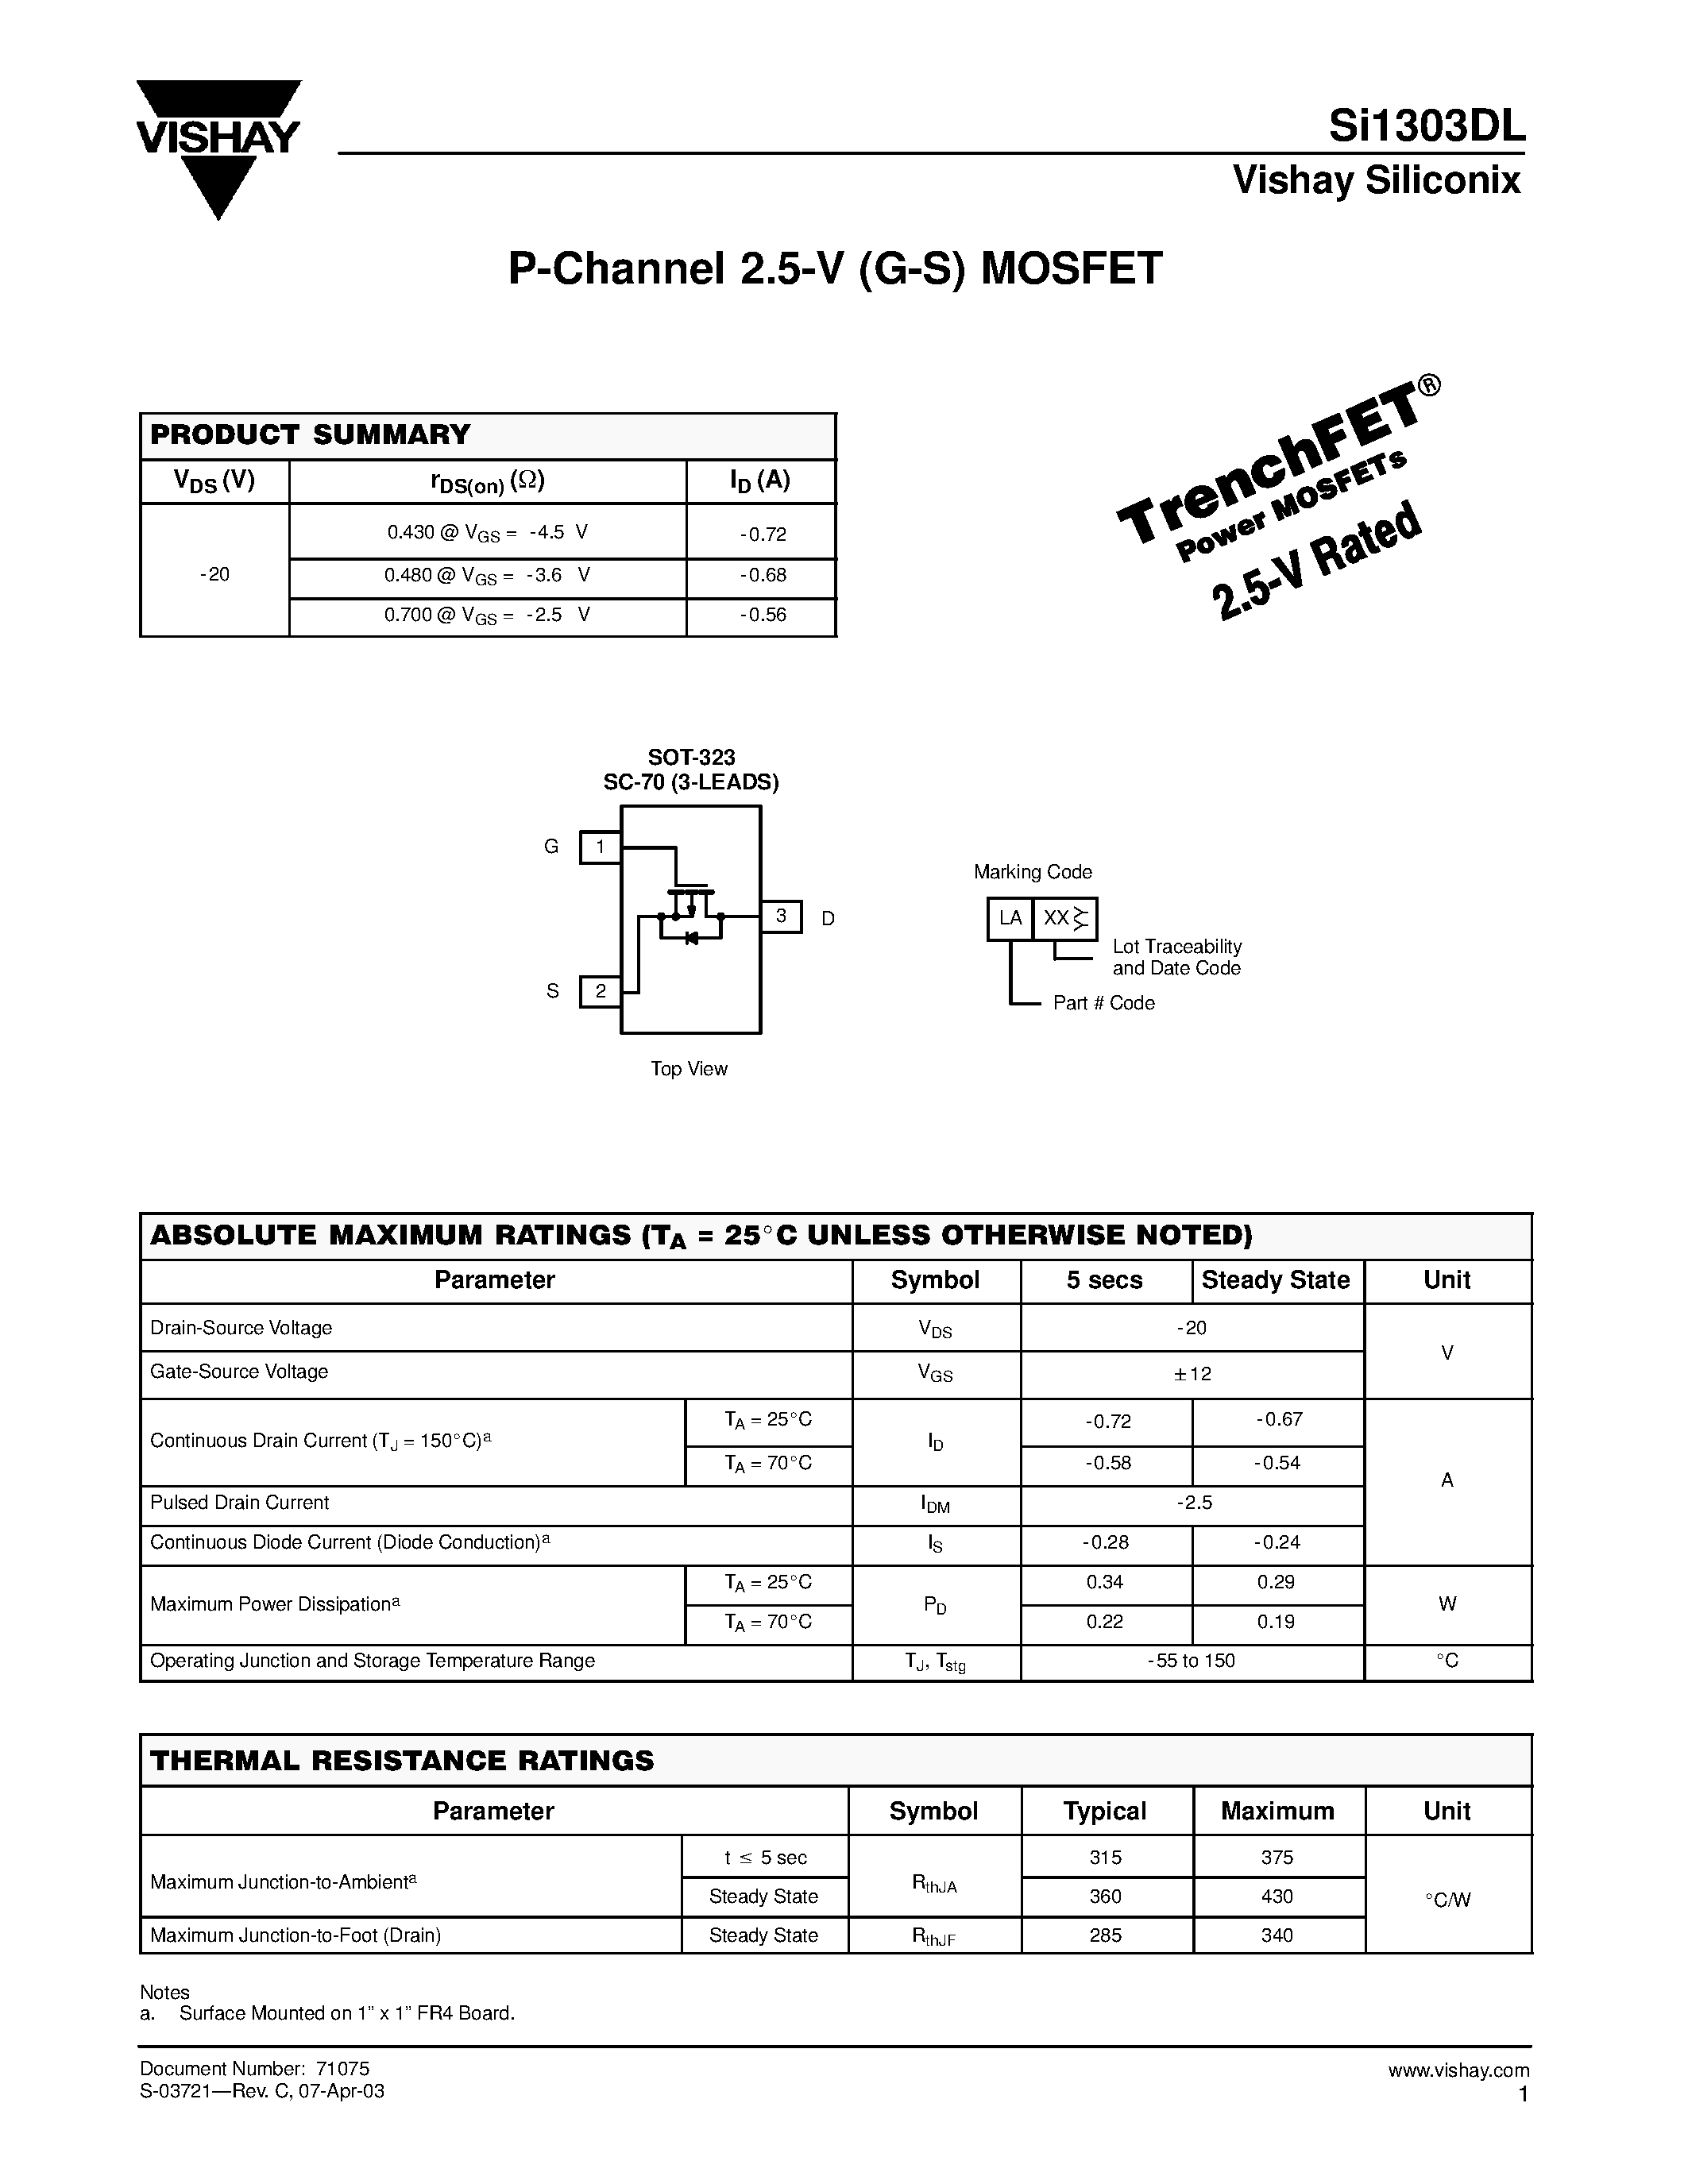 Datasheet SI1303DL - P-Channel 2.5-V (G-S) MOSFET page 1